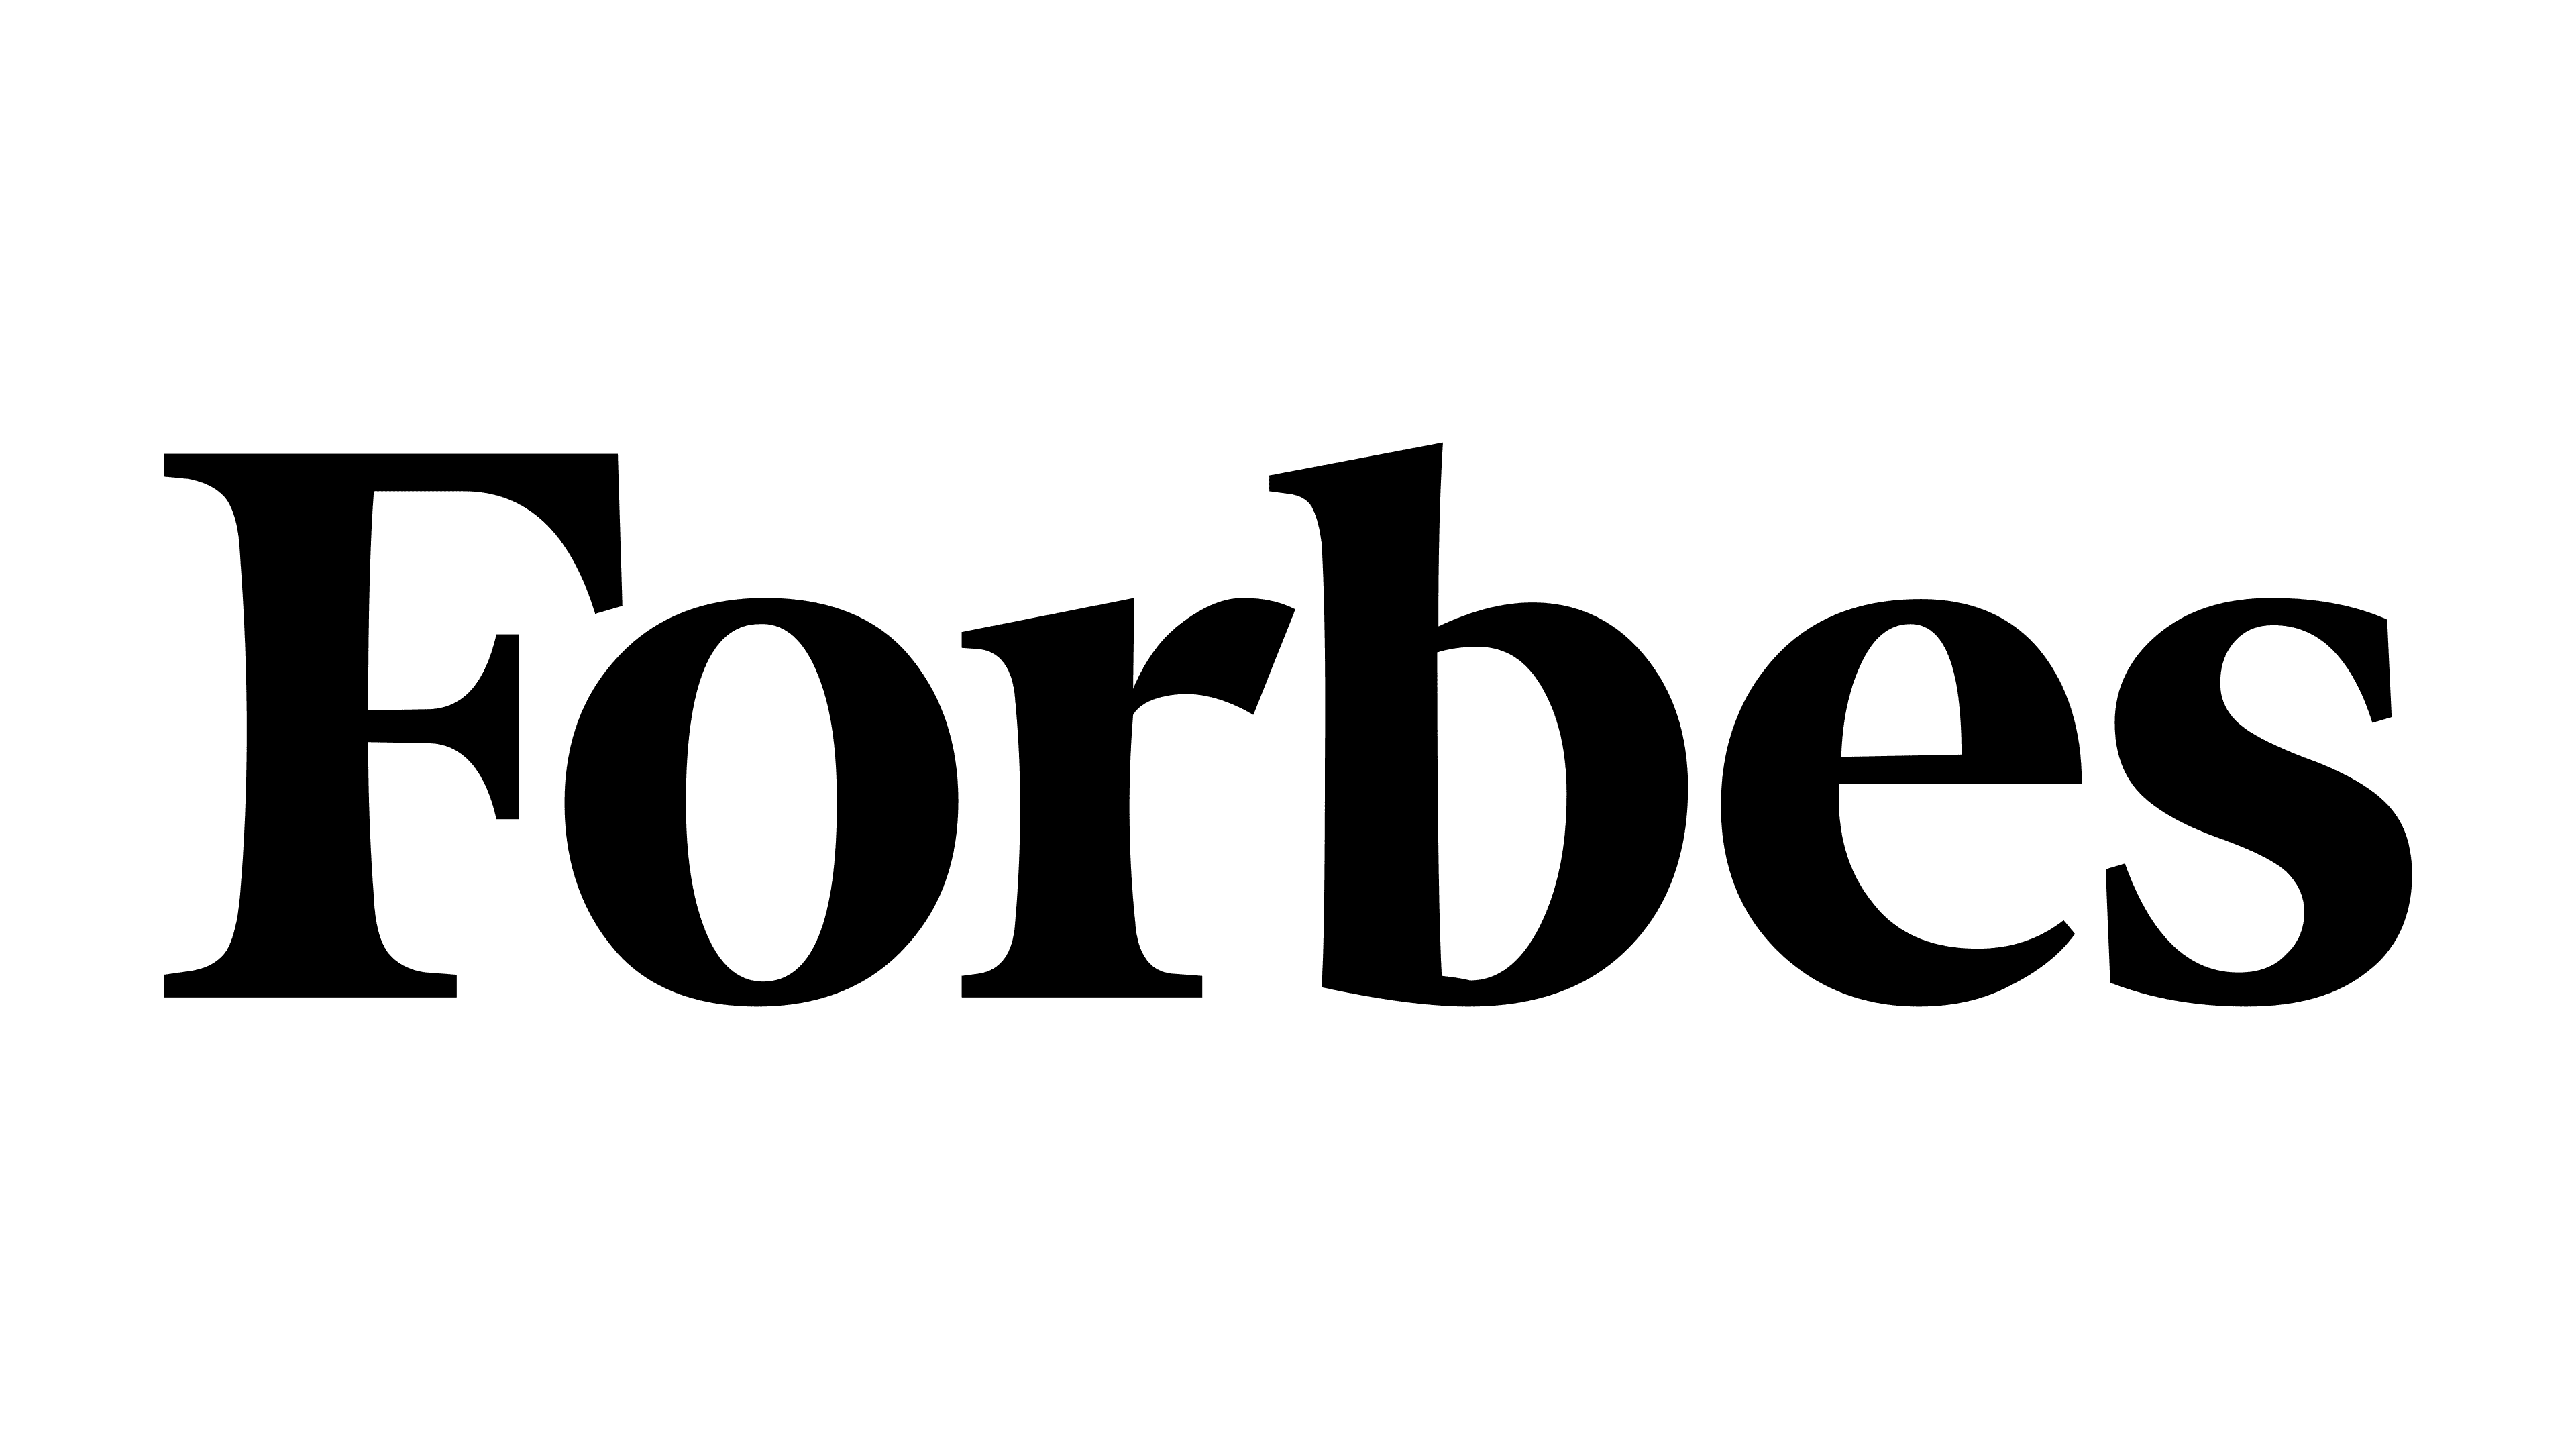 Forbes-logo.png